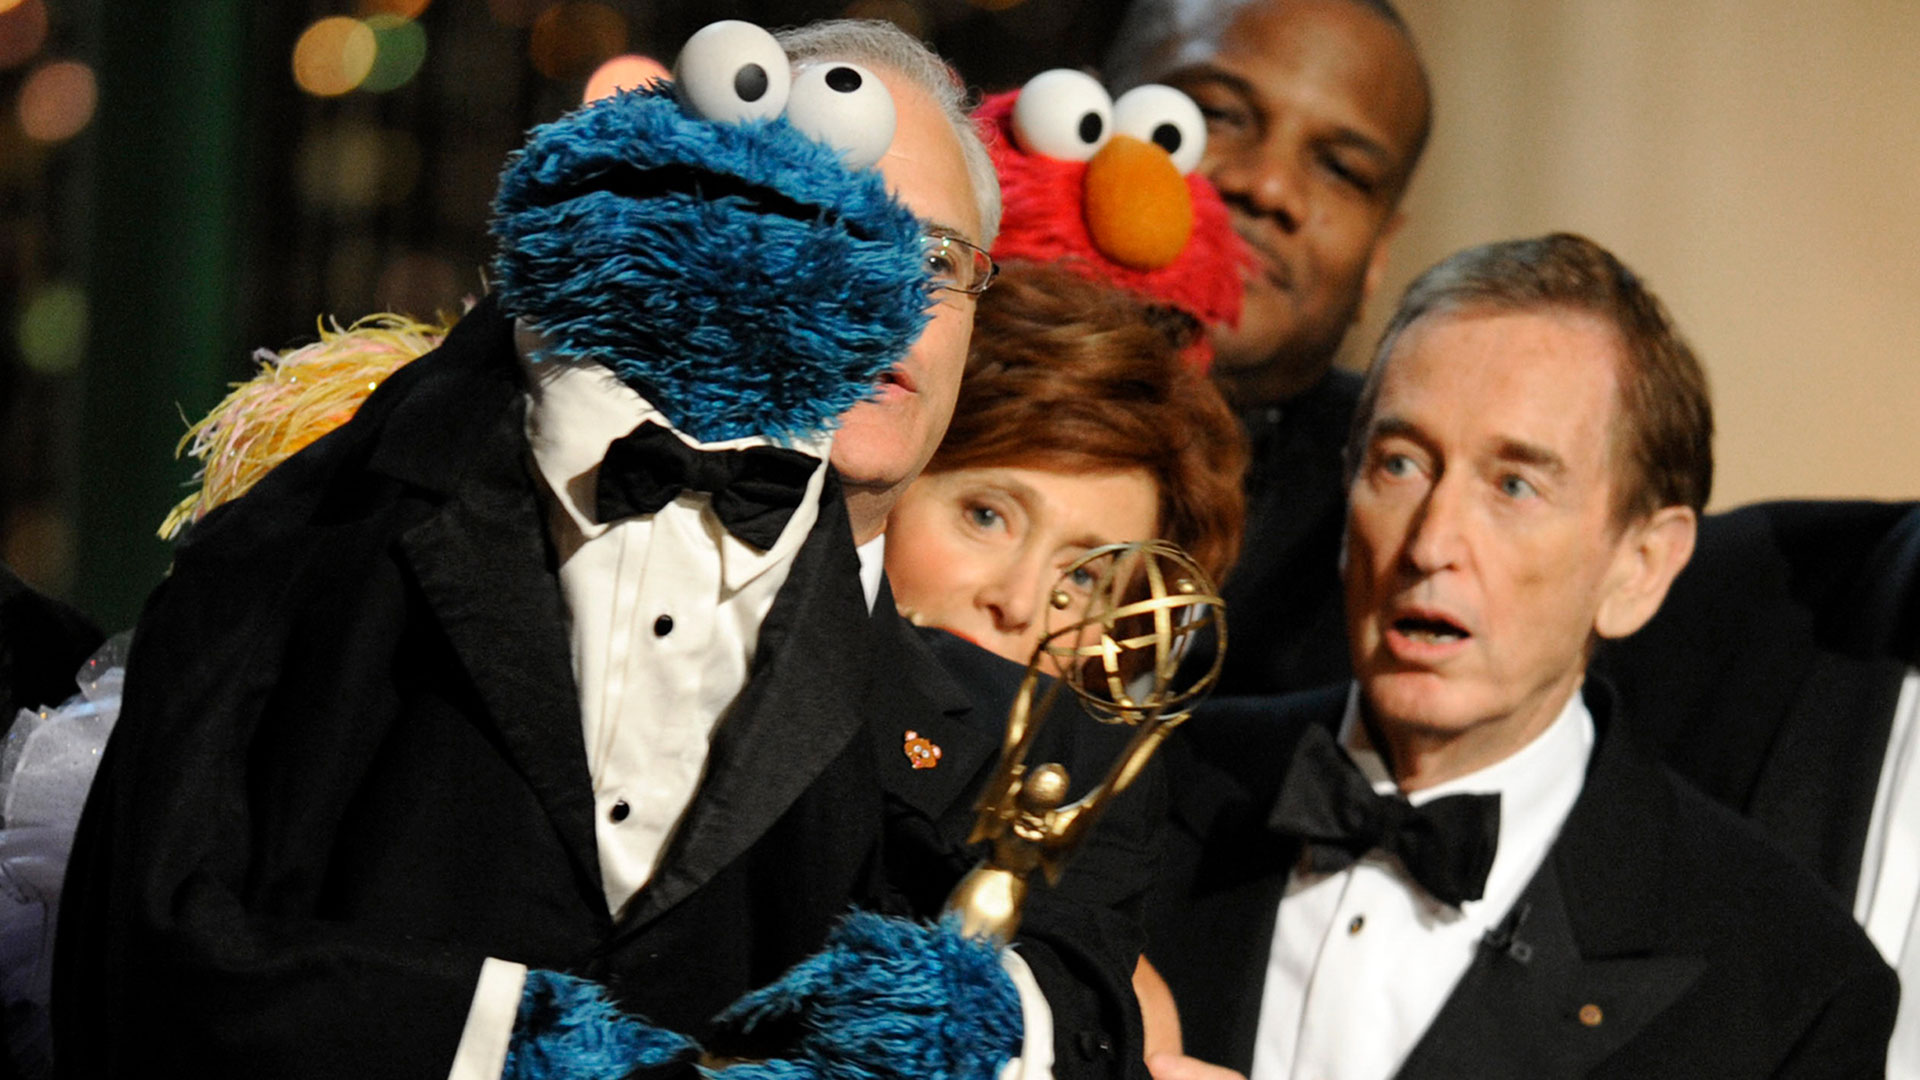 FILE - Bob McGrath, right, looks up at Cookie Monster as they accept the Lifetime Achievement Award for '"sesame street" at the Daytime Emmy Awards on August 30, 2009 in Los Angeles.  (AP Photo/Chris Pizzello, File)